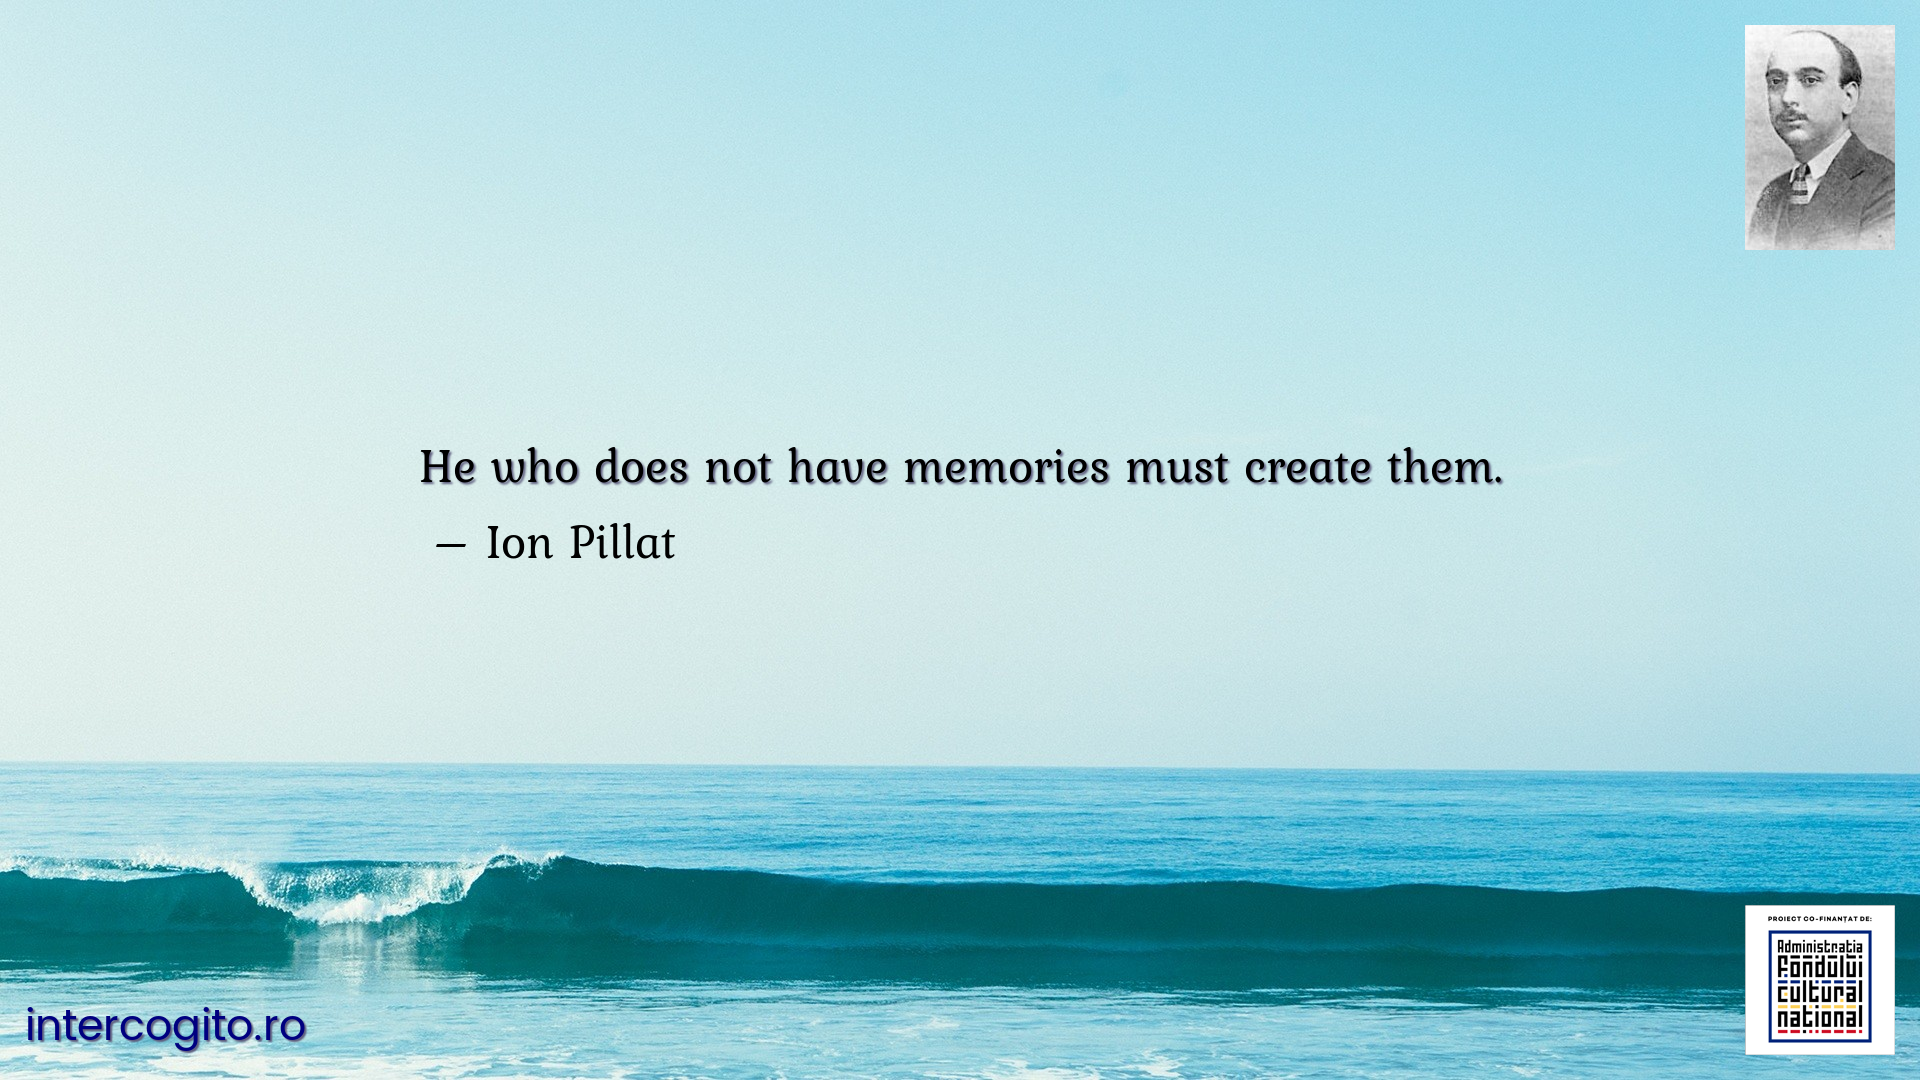 He who does not have memories must create them.